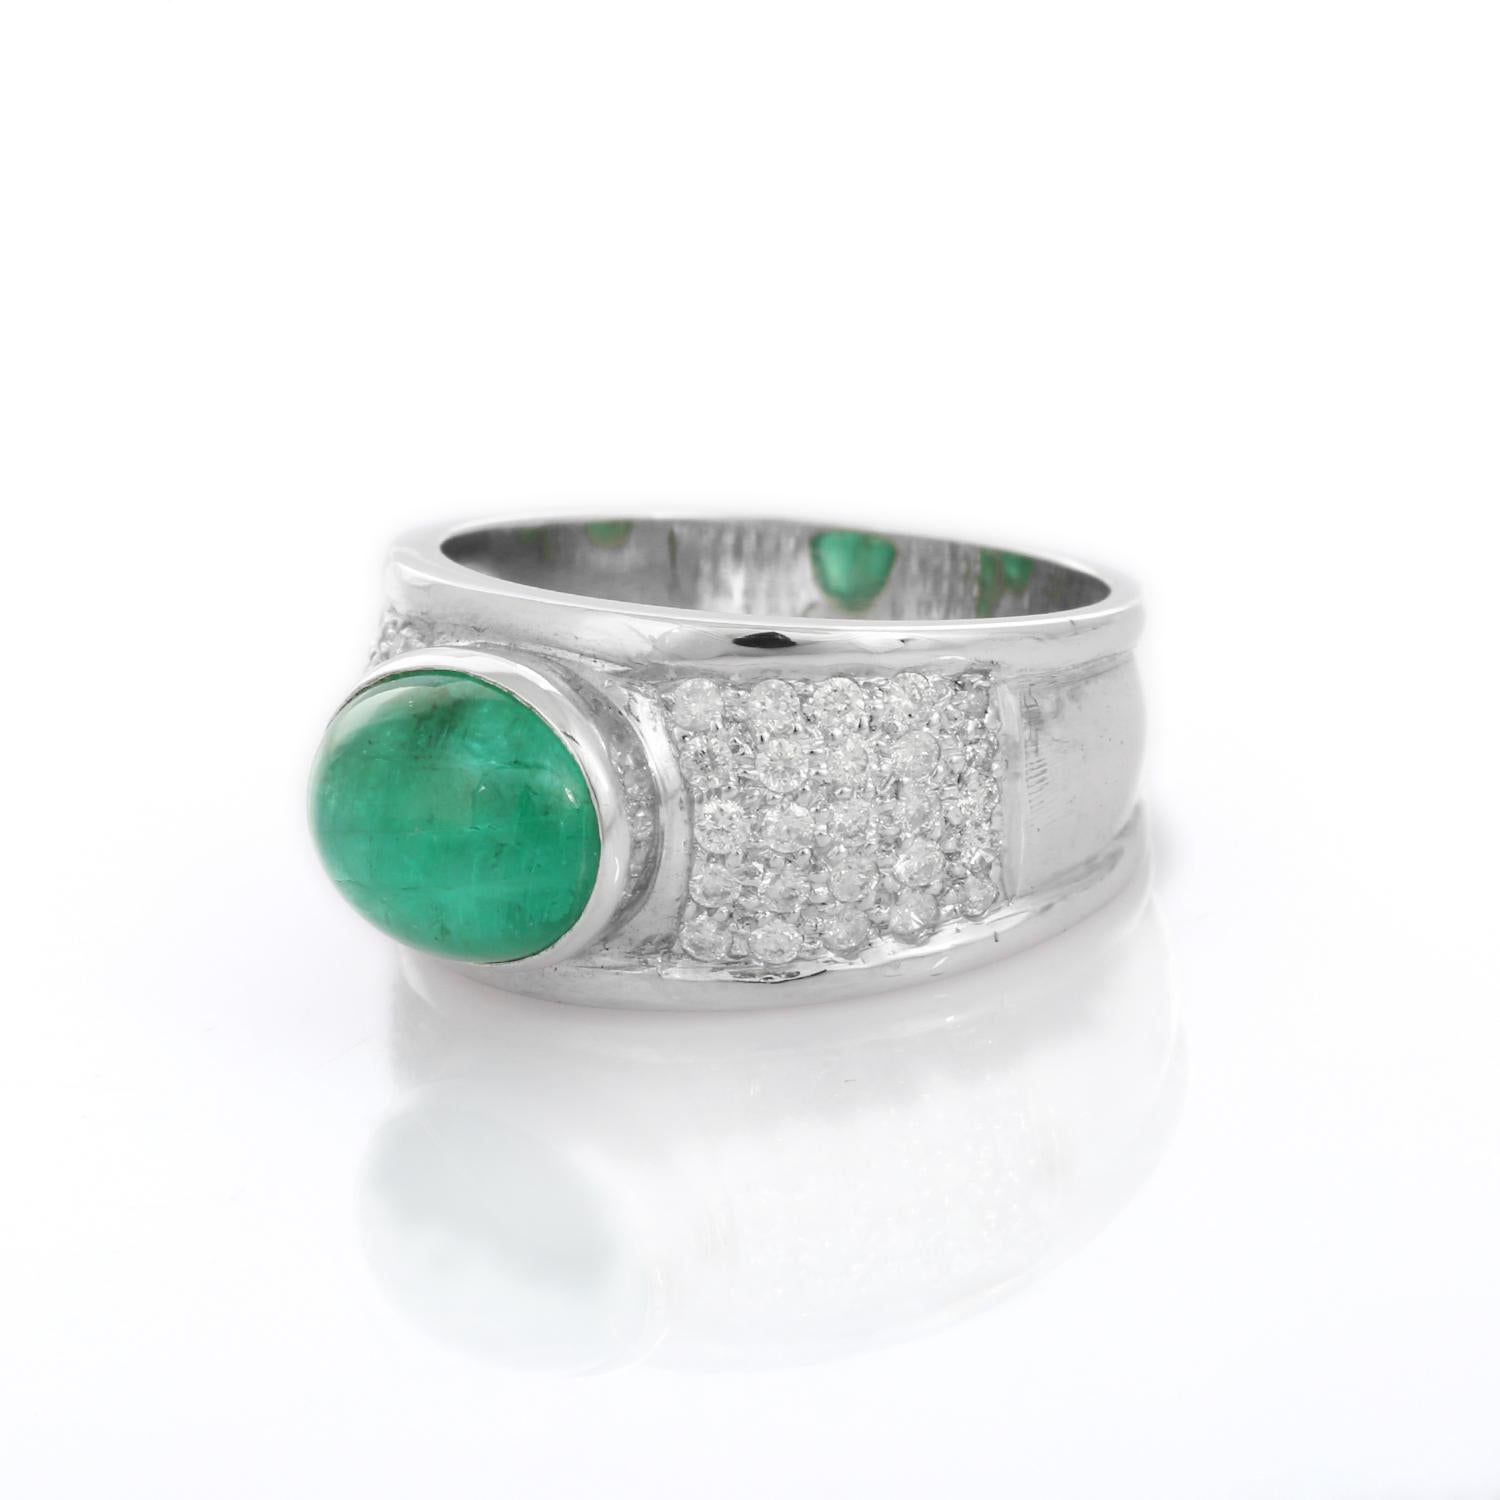 For Sale:  3.08 Carat Oval Shaped Emerald and Diamond Cocktail Ring in 18K White Gold 3